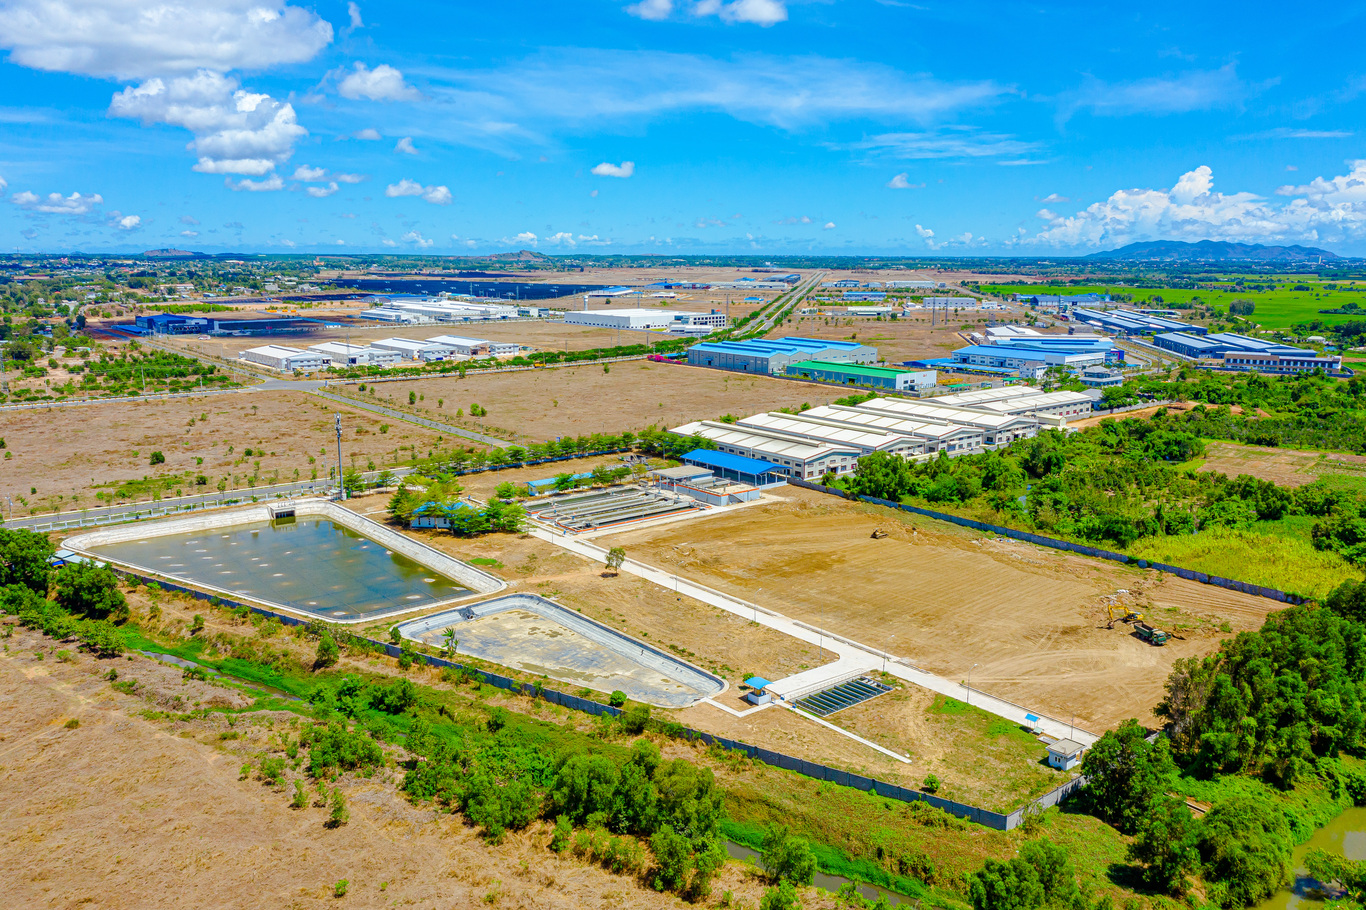 Sonadezi has prepared clean land funds to welcome the inflows of FDI into Vietnam